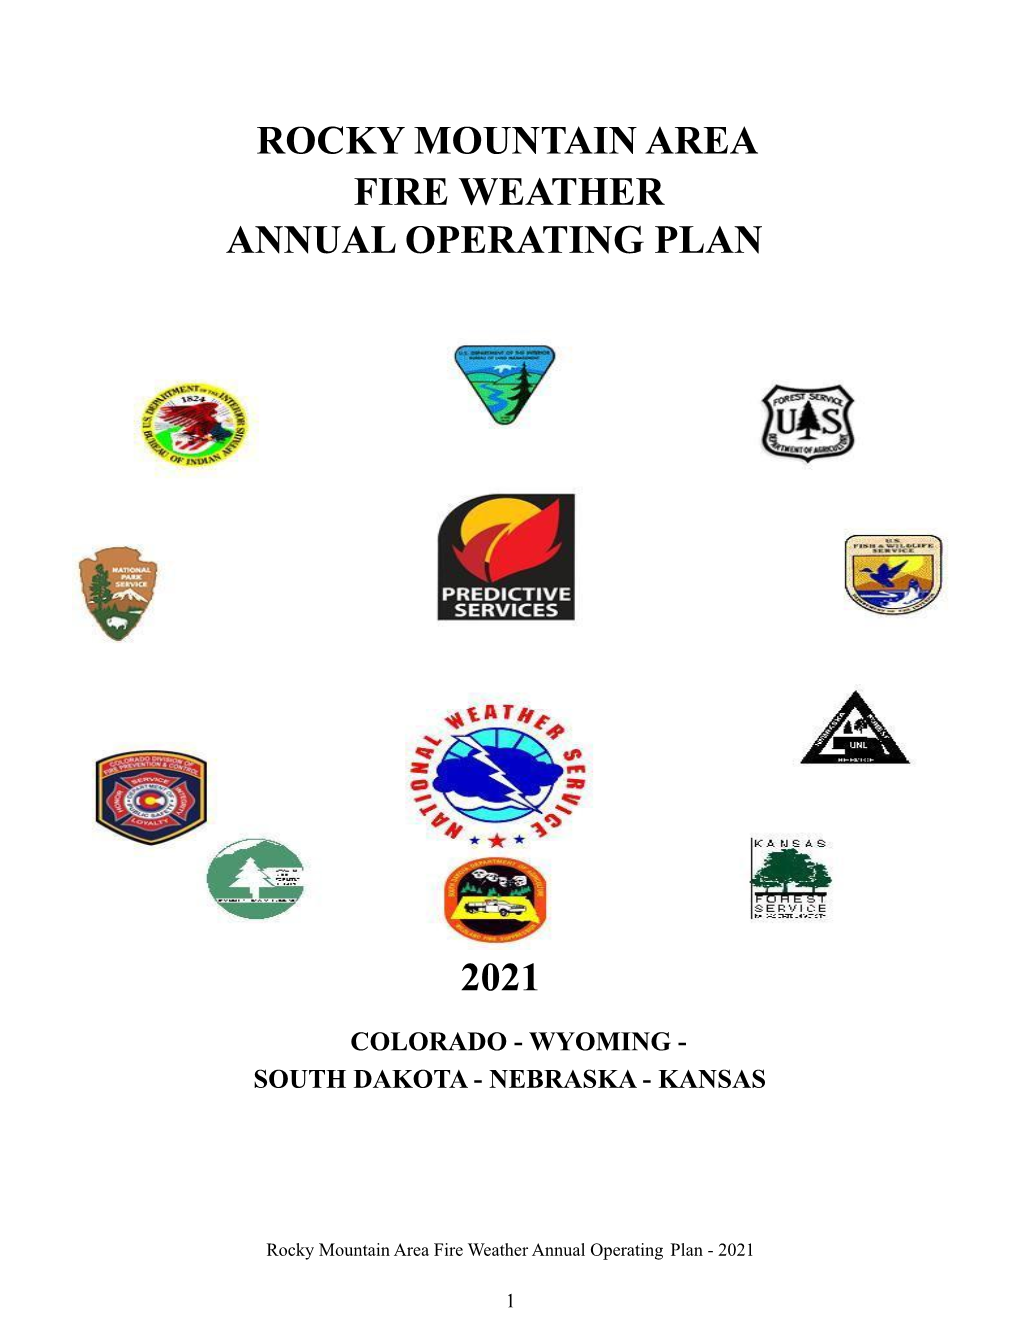 Rocky Mountain Area Fire Weather Annual Operating Plan 2021